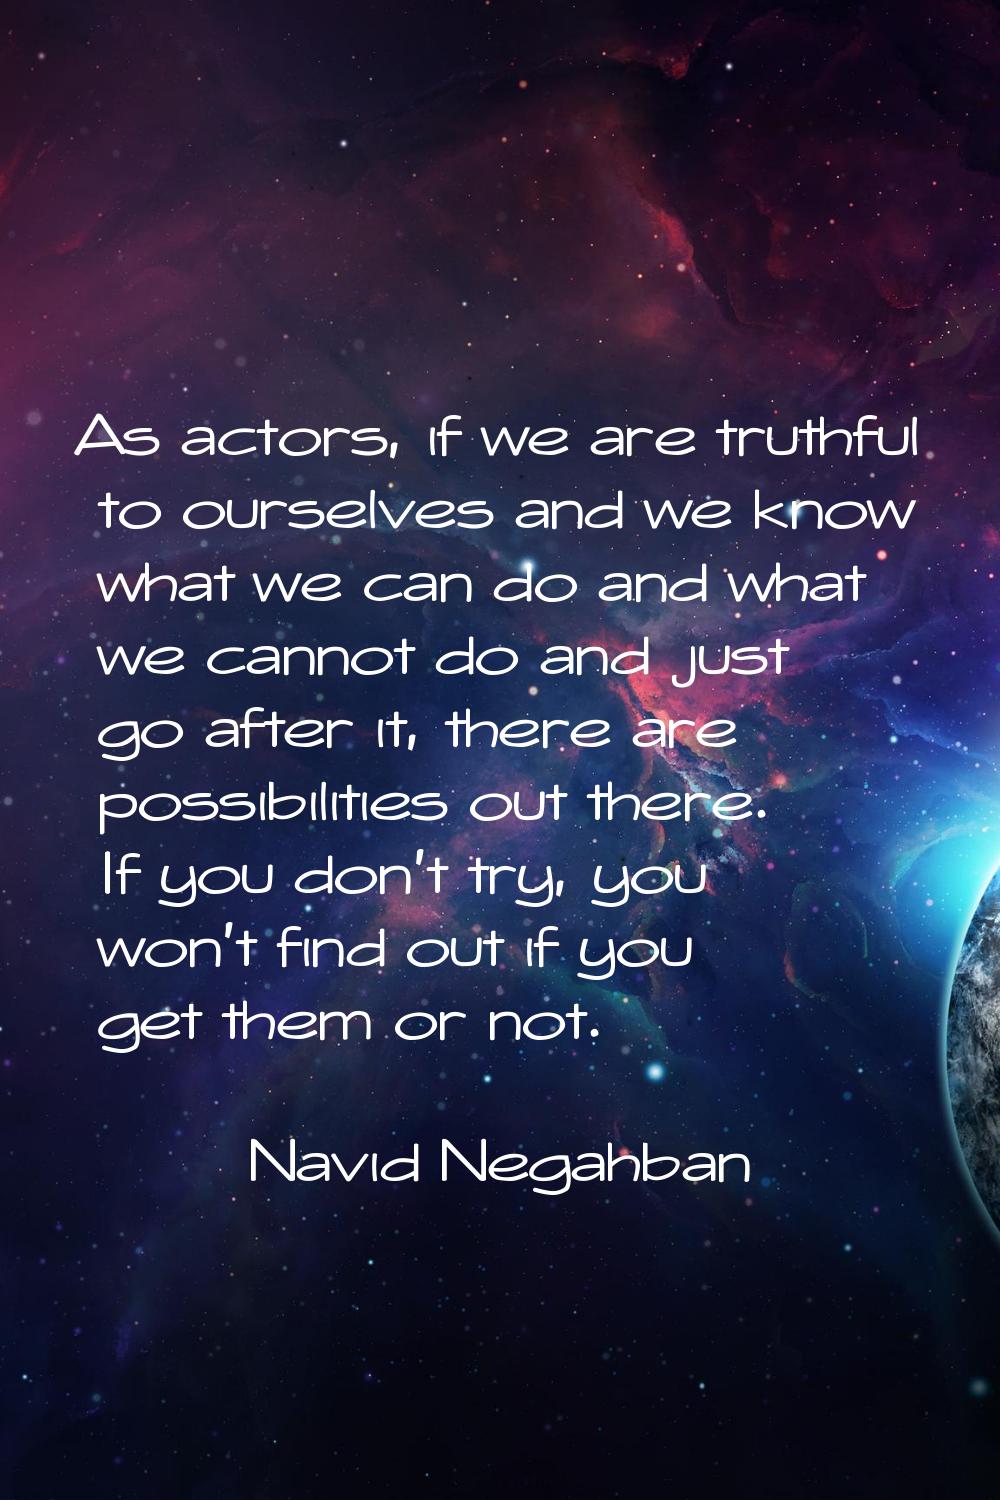 As actors, if we are truthful to ourselves and we know what we can do and what we cannot do and jus